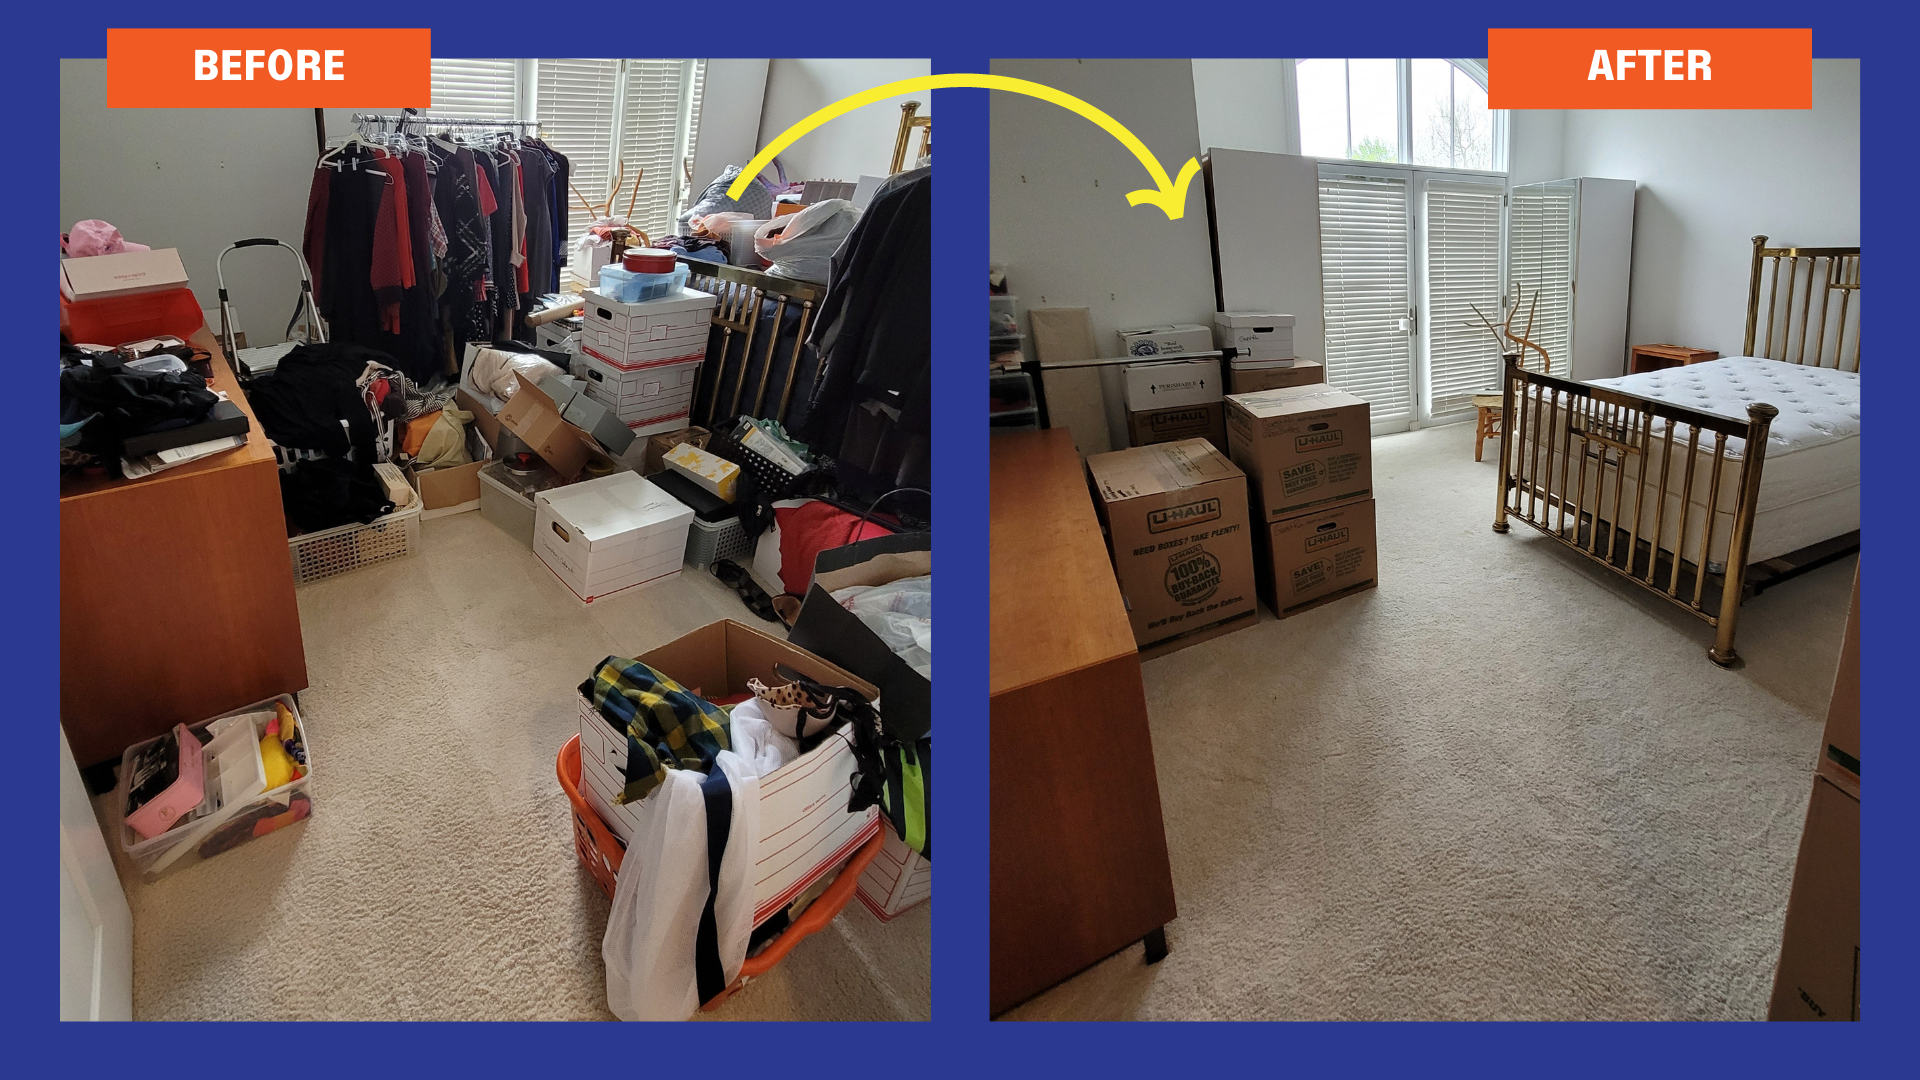 Before and after of organizing and helping a client pack. The left is cluttered with objects ready to be packed. The right is everything neatly tucked away in moving boxes.